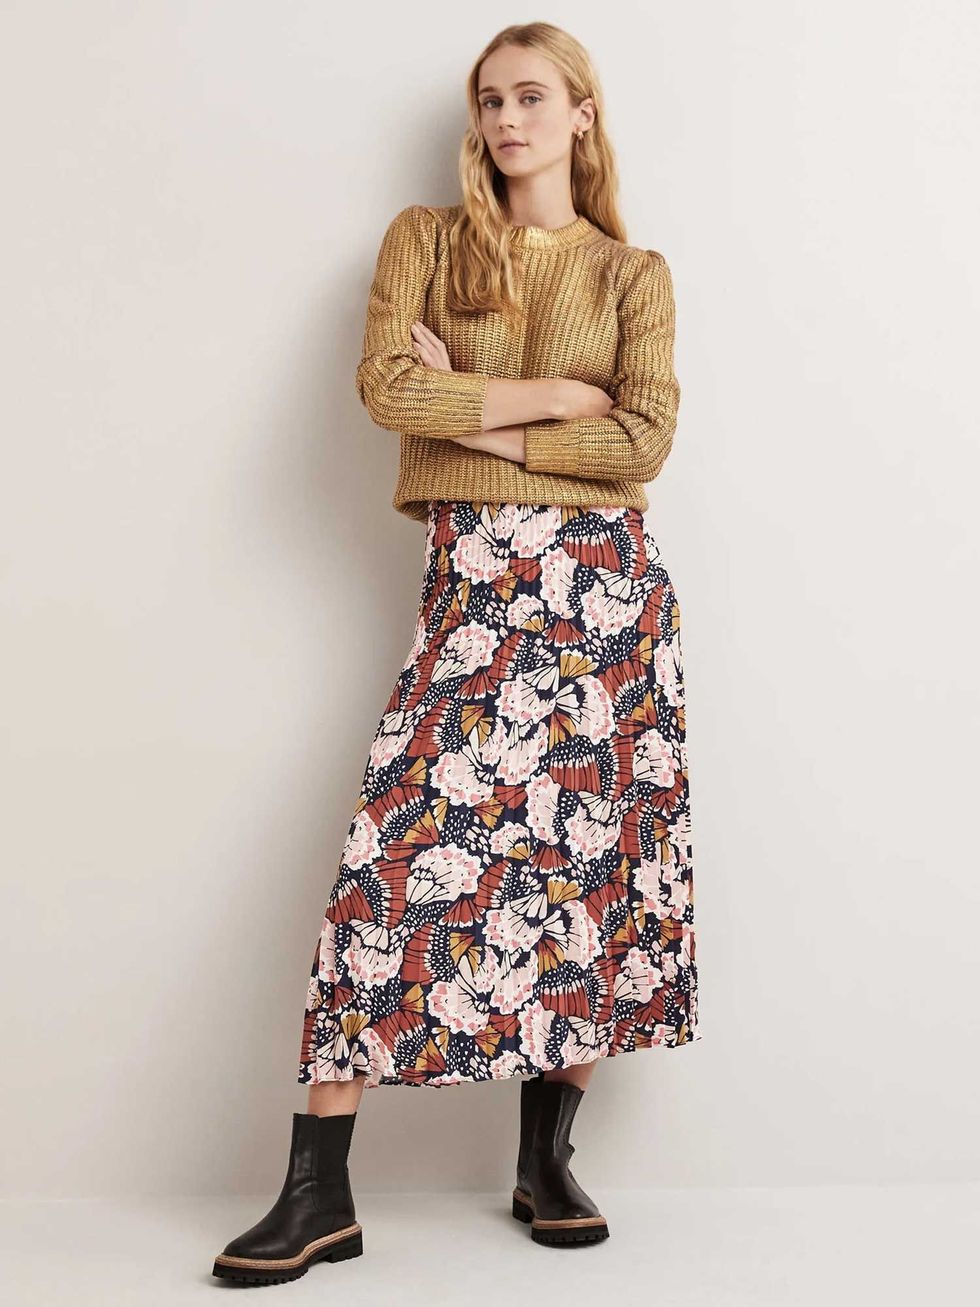 Boden dress - Boden's sell-out dress is a new season must-have